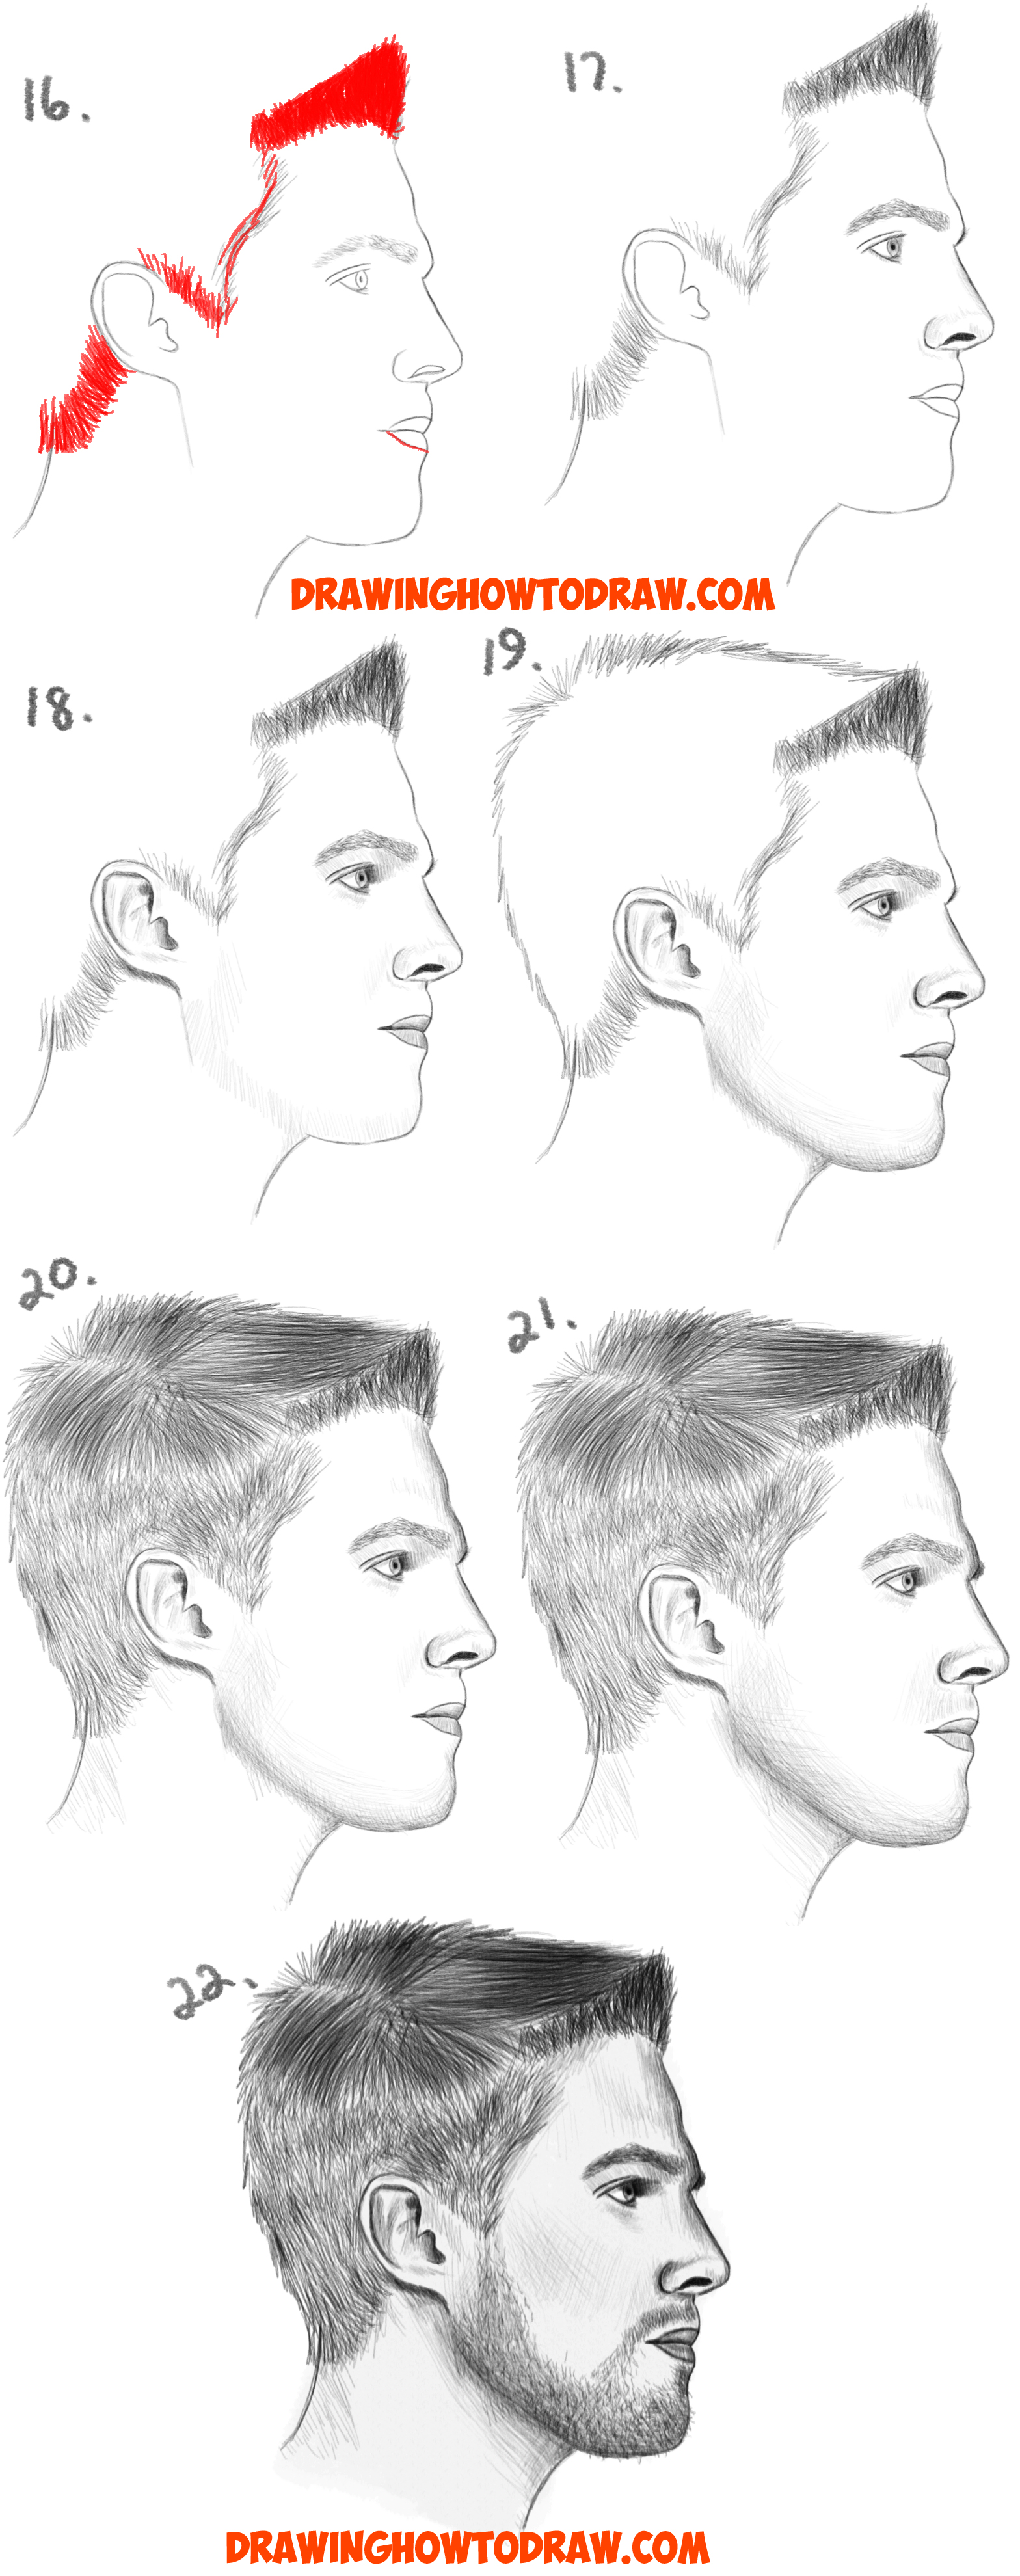 Learn How to Draw a Face in 16 Easy Steps for Beginners